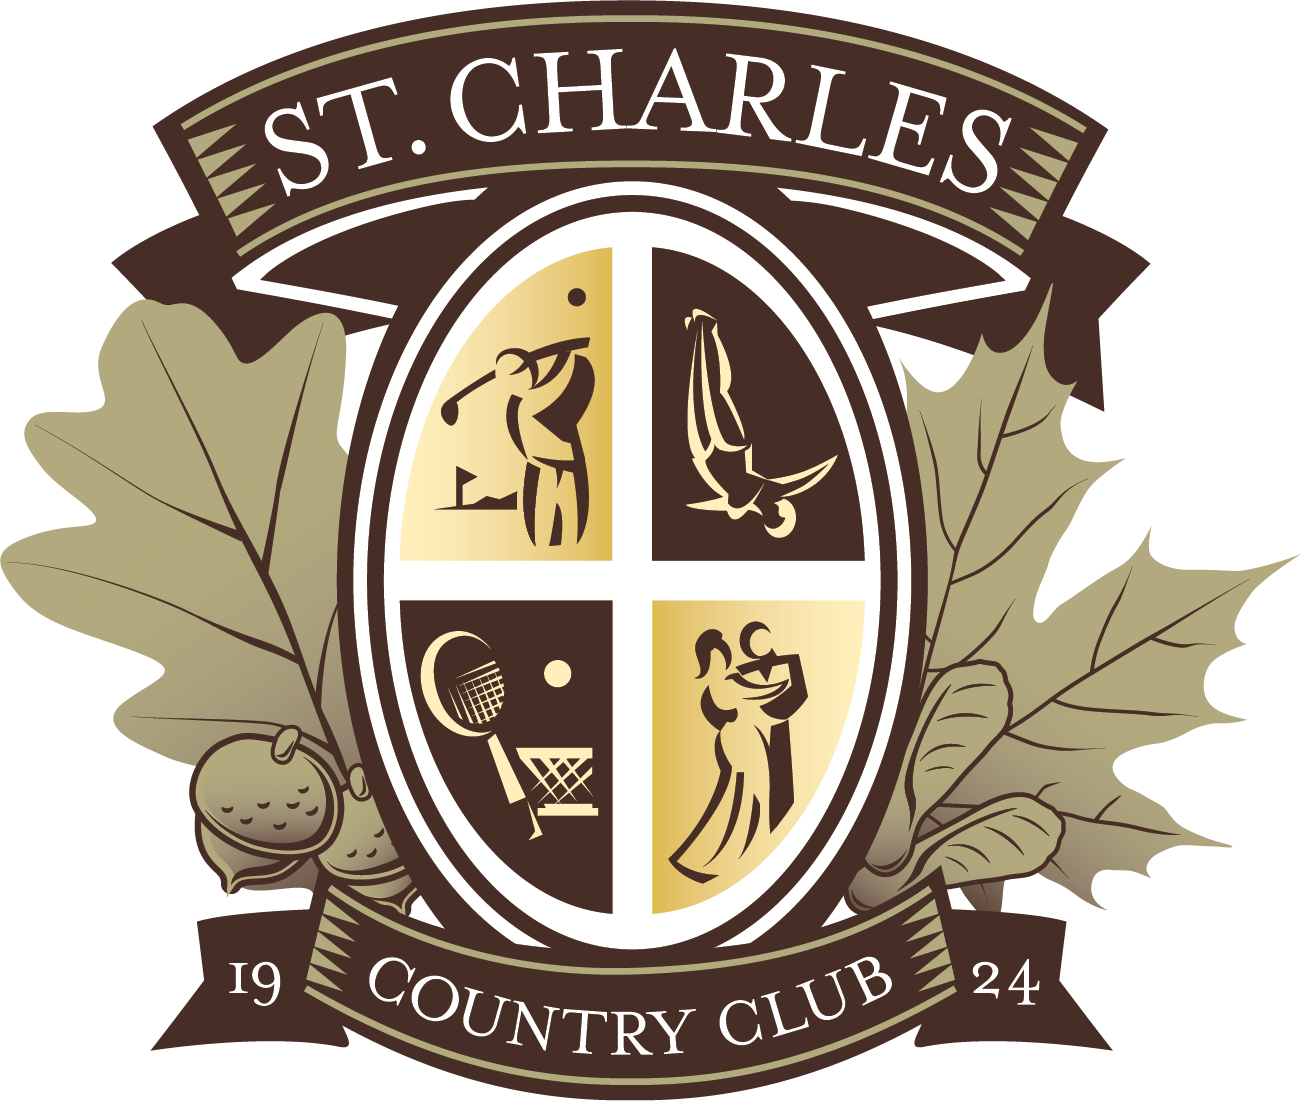 St. Charles Country Club